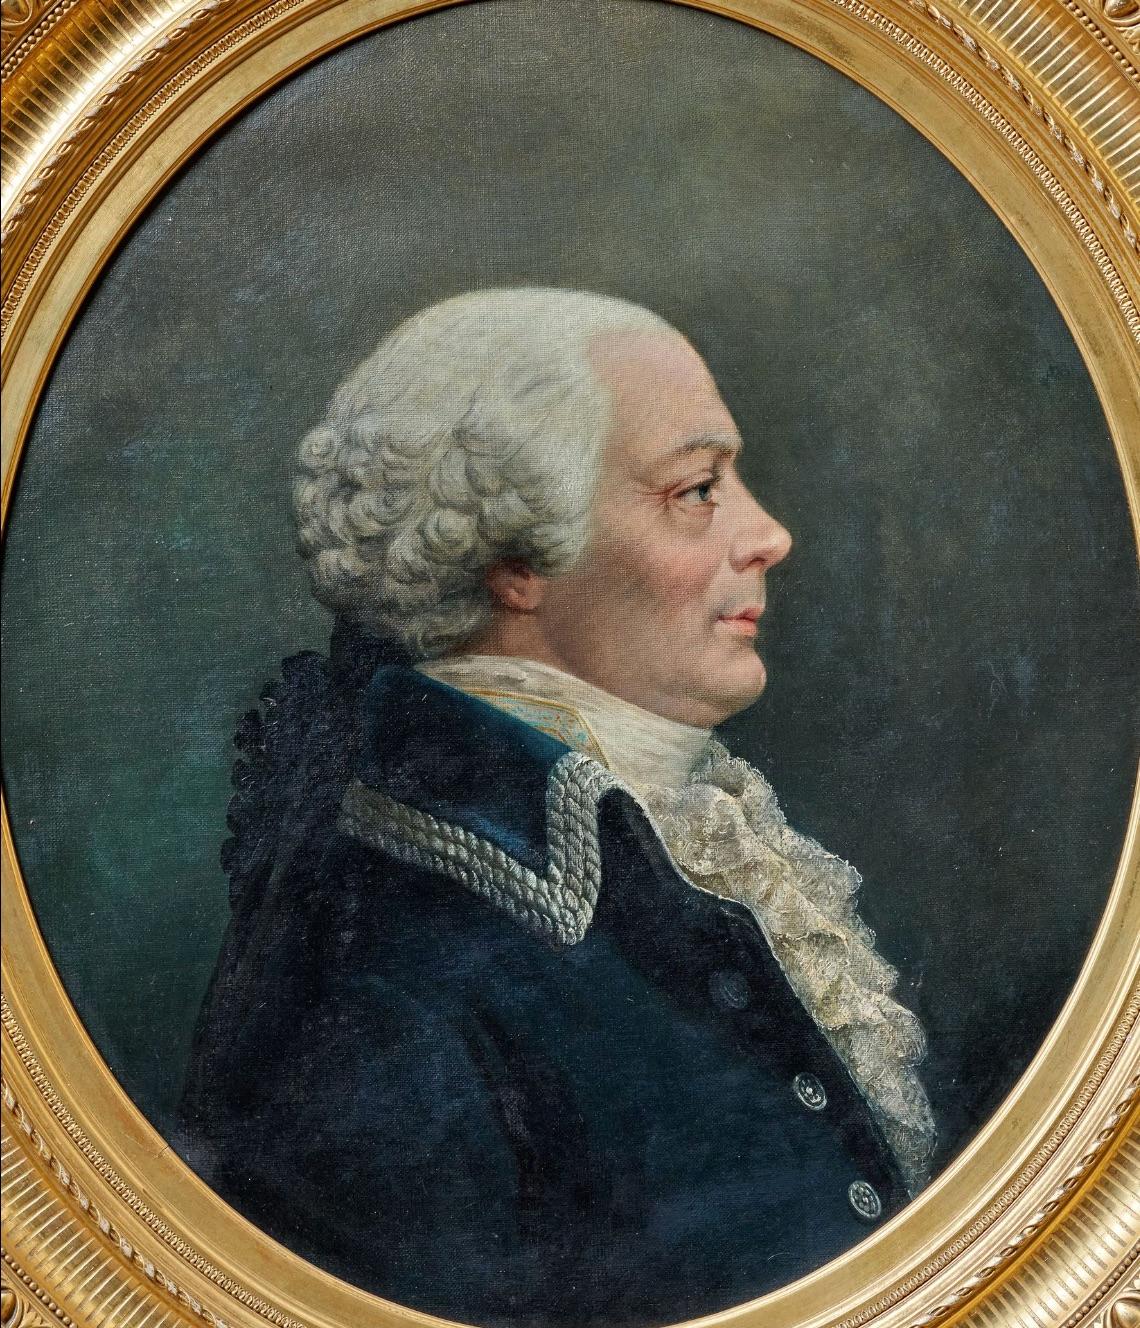 Count Constant Duval de Beaulieu (Leuze in 1751 and Mons in 1828) - Painting by Unknown